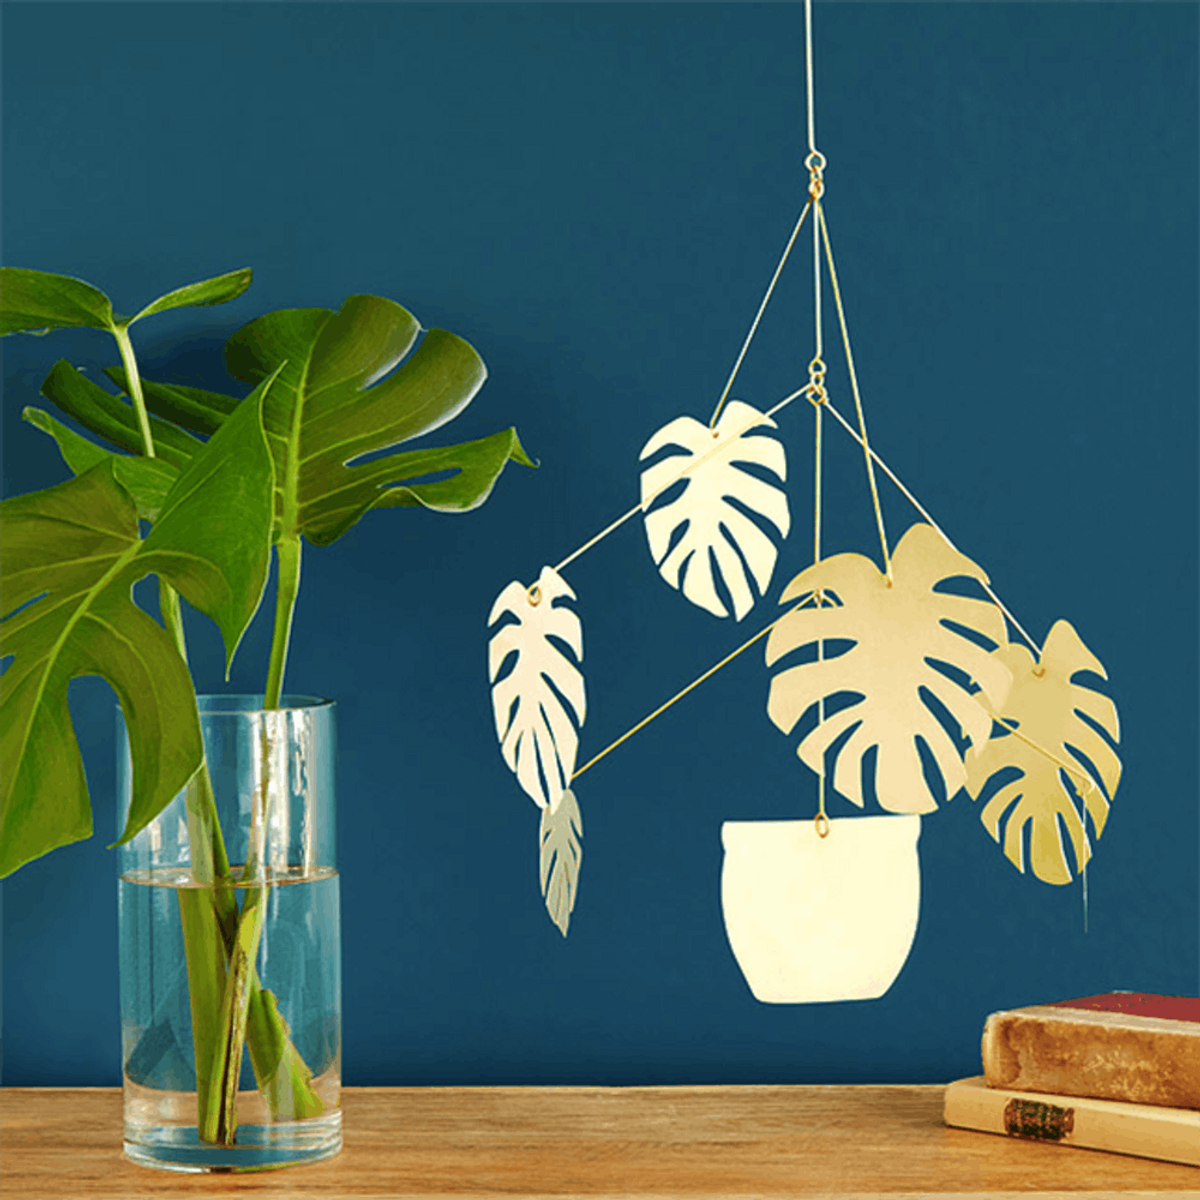 11 Artsy Mobiles We Would Totally Hang in Our Homes